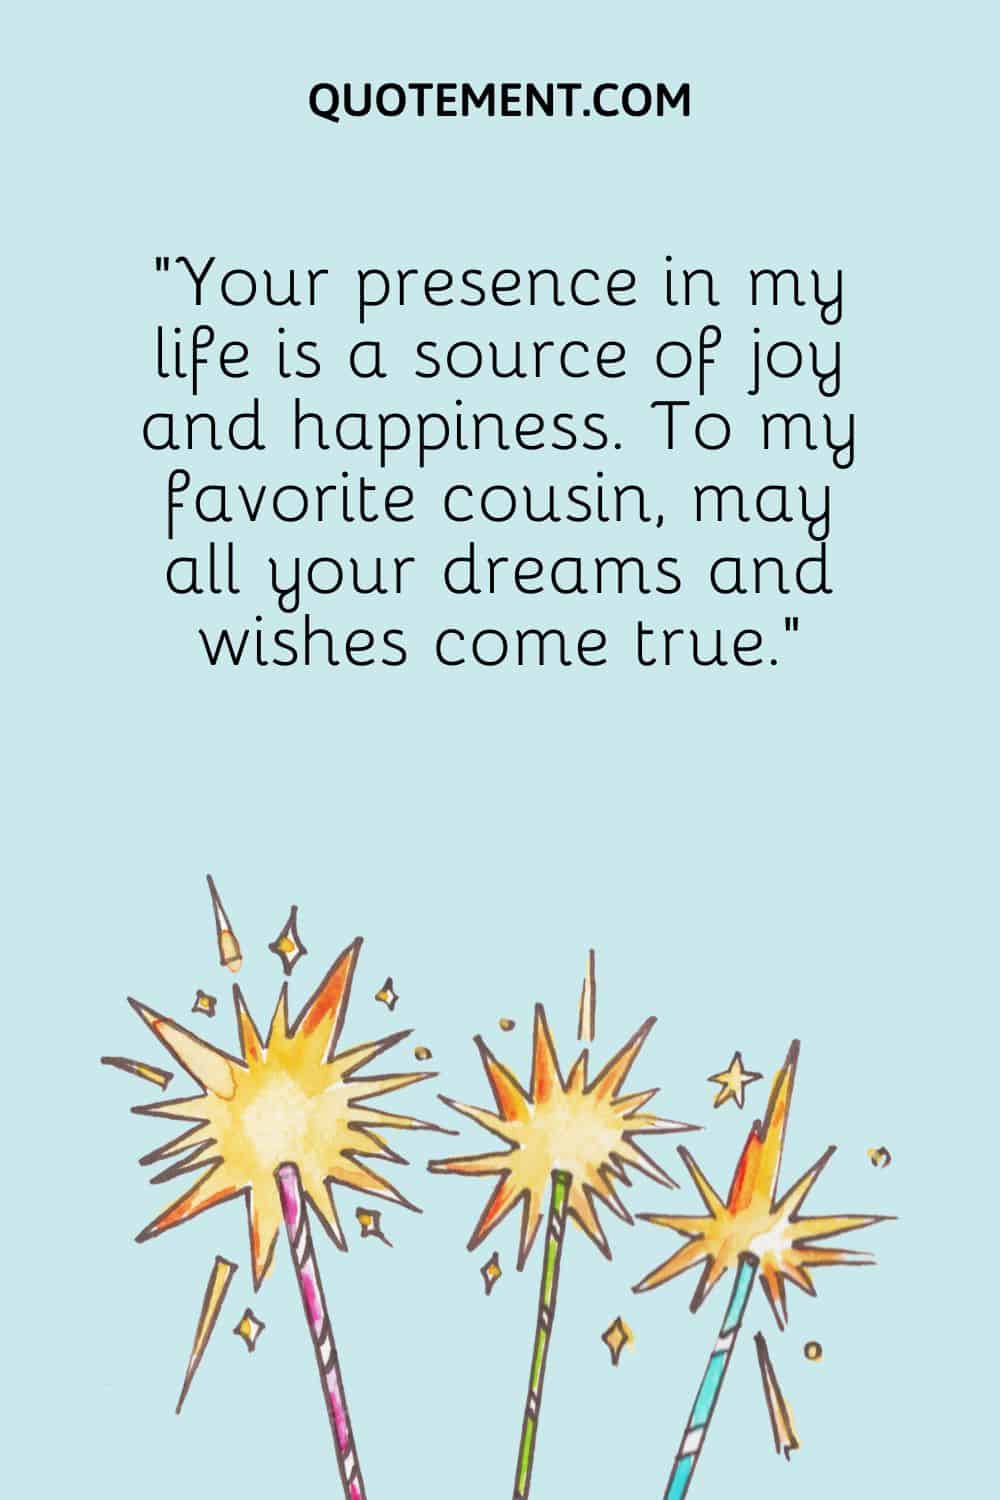 Your presence in my life is a source of joy and happiness.